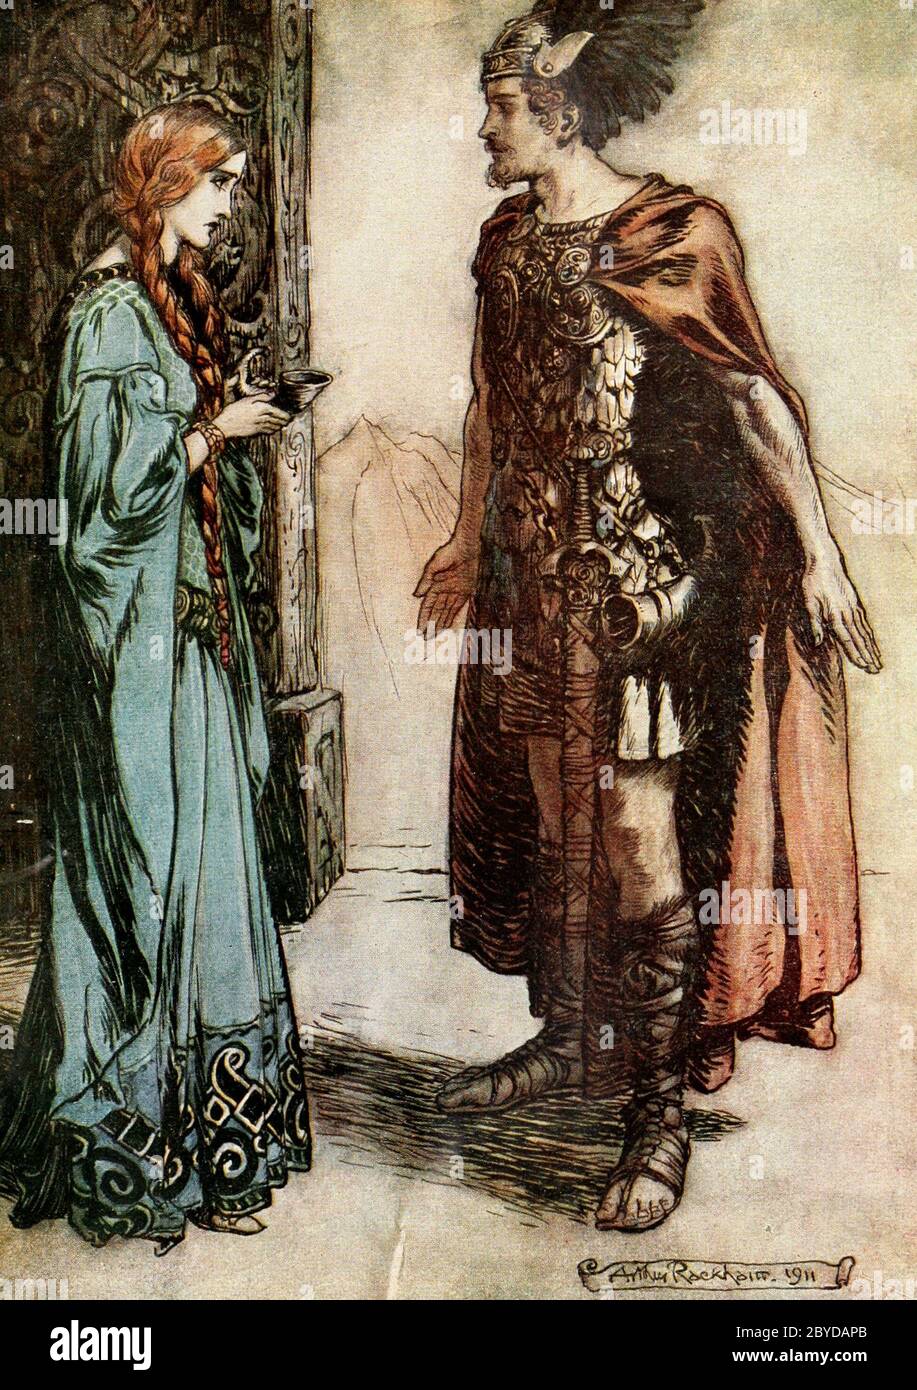 Siegfried hands the drinking horn back to Gutrune, and gazes at her with sudden passion from The Twilight of the Gods - Arthur Rackham, 1911 Stock Photo